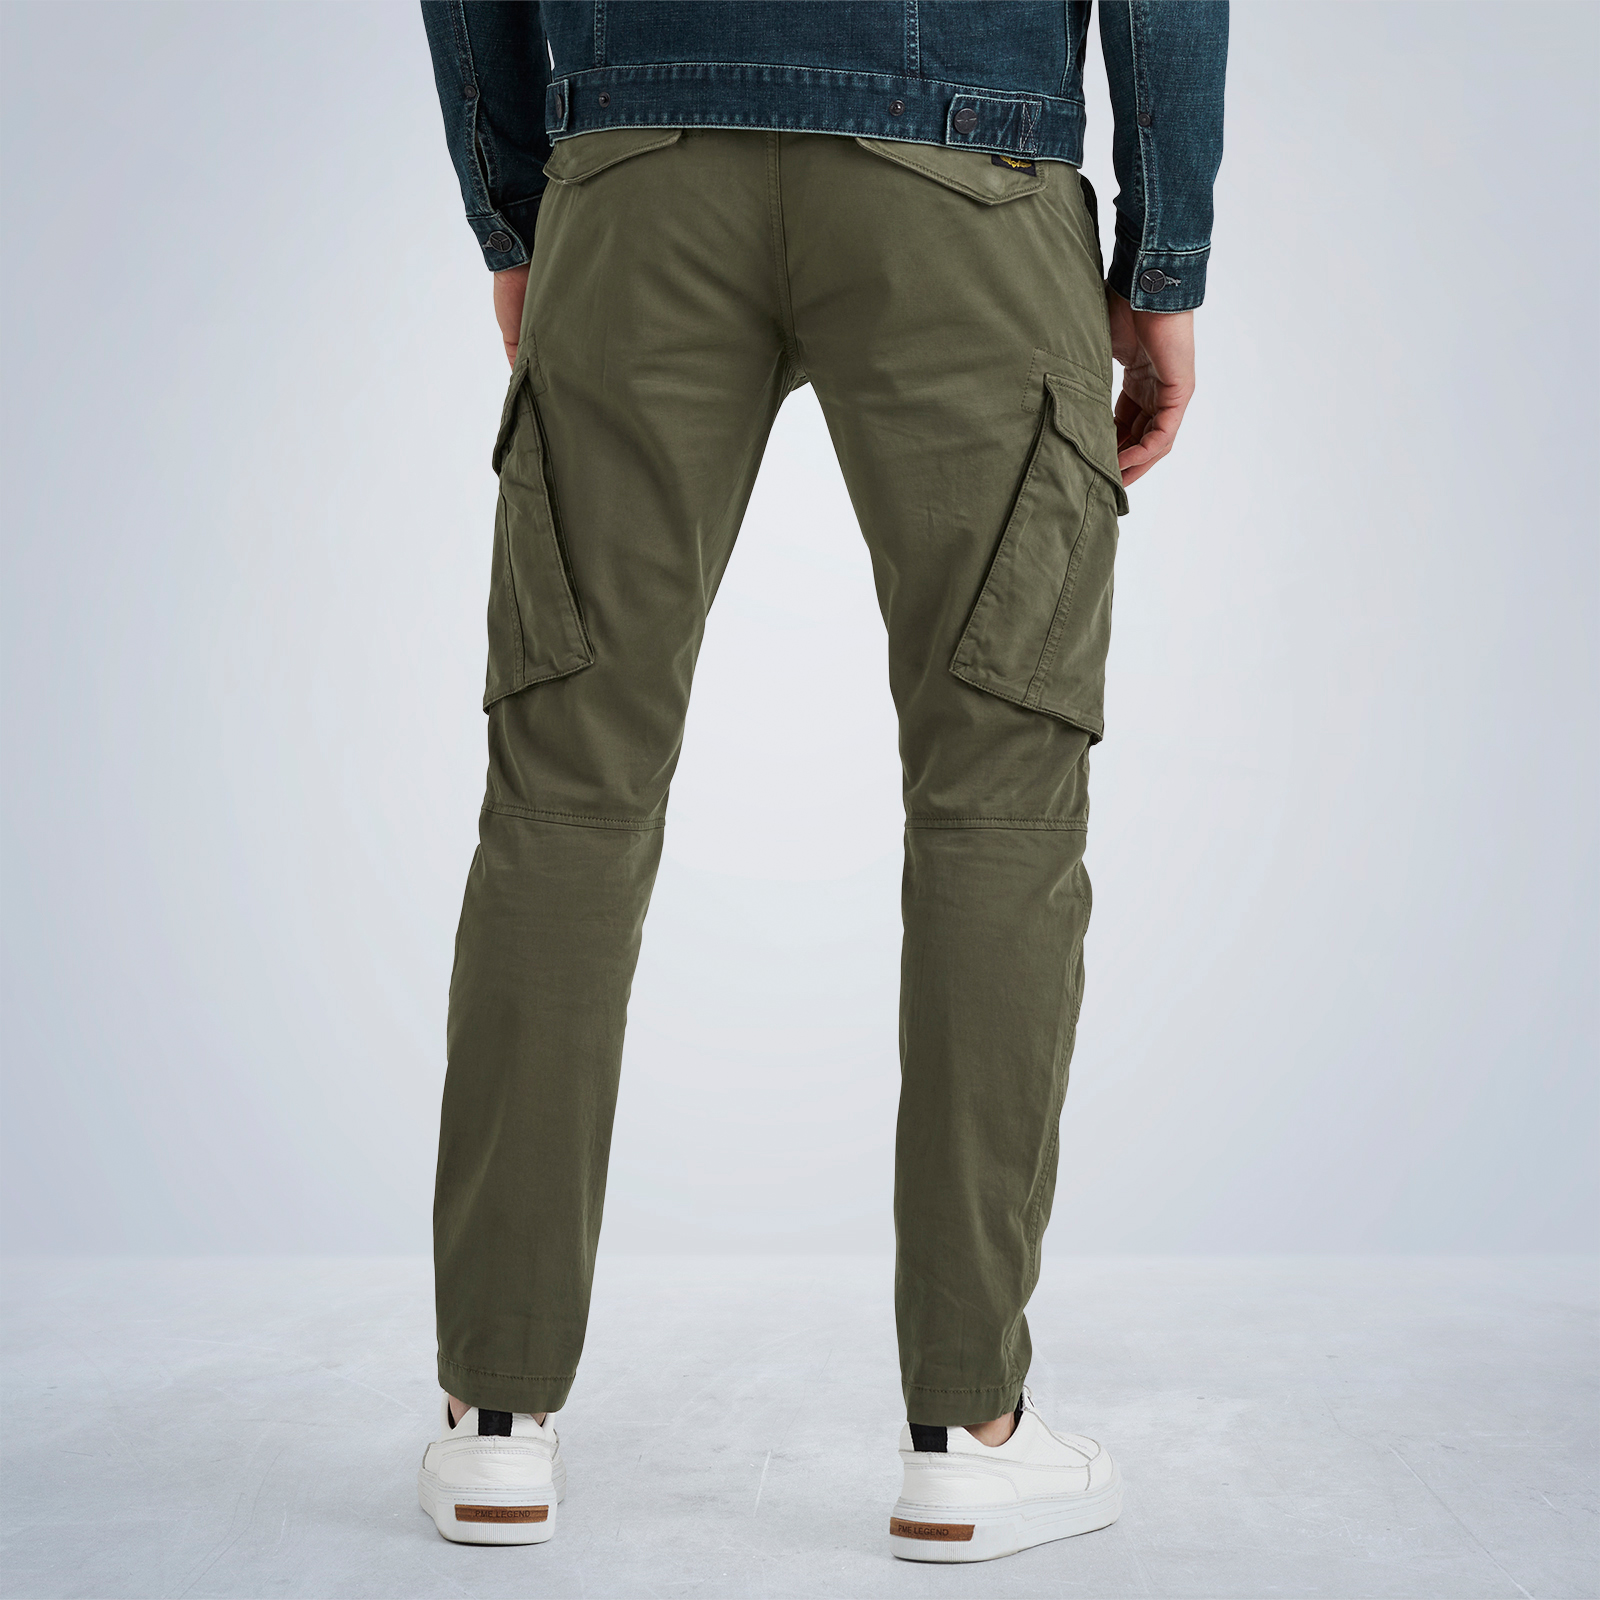 Nordrop tapered fit returns cargo LEGEND PME shipping | Free and pants 